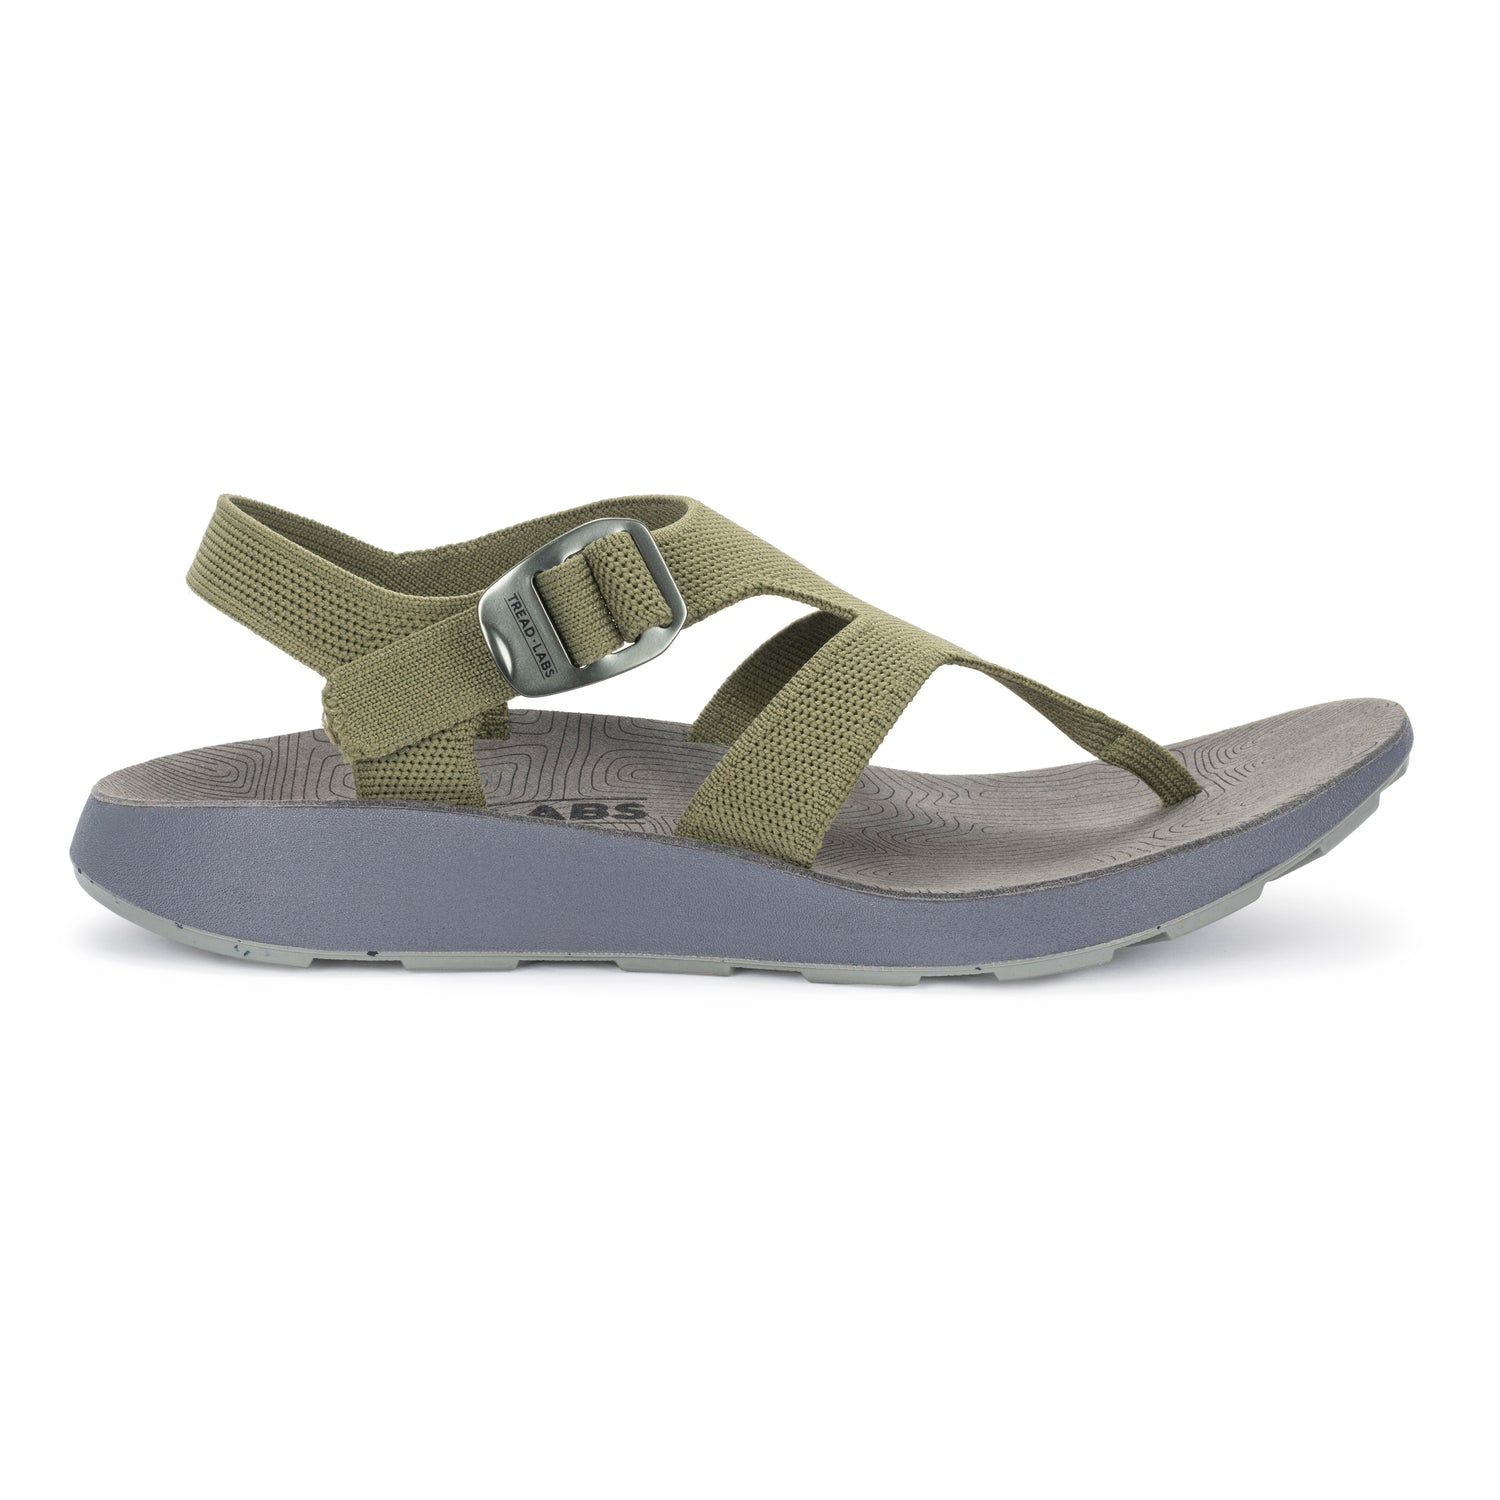 Men's Albion Sandal with Arch Support in Leaf Green